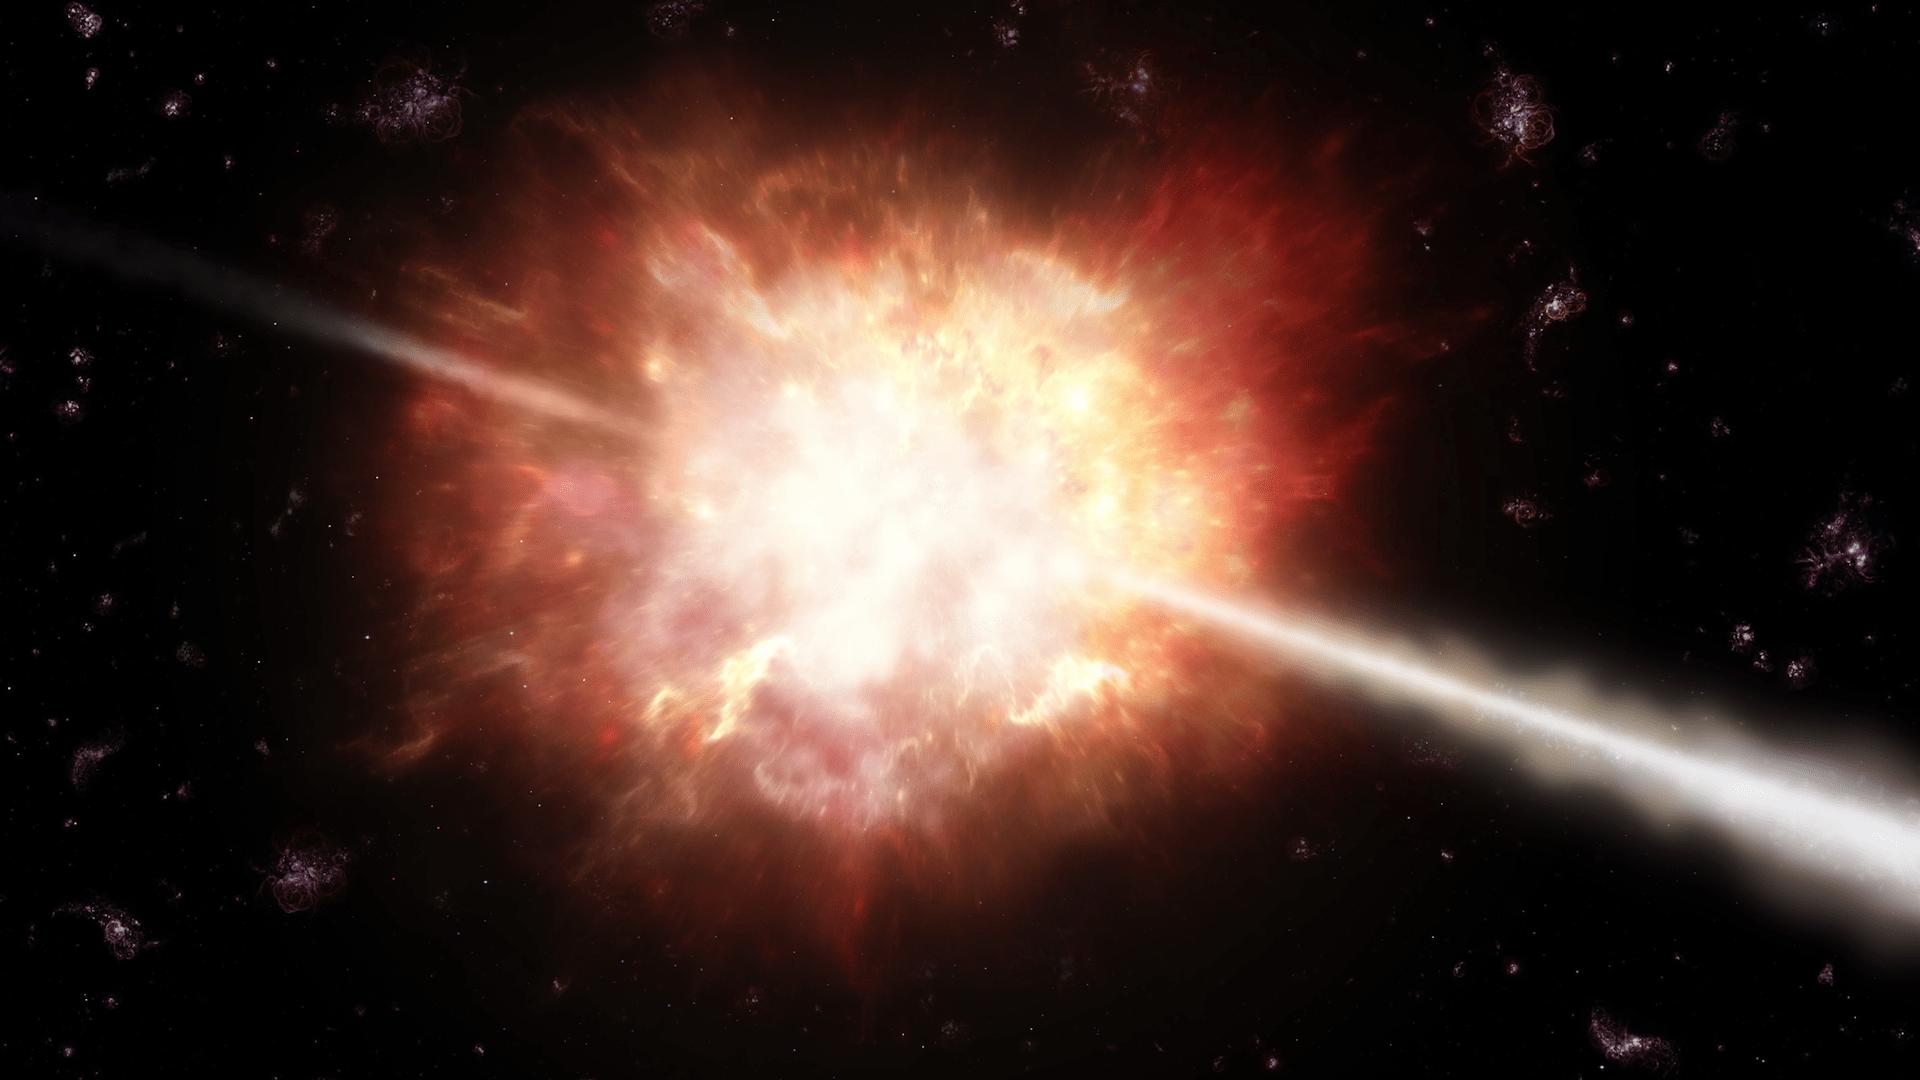 Astronomers Just saw the Most Powerful Gamma-ray Burst Ever Recorded